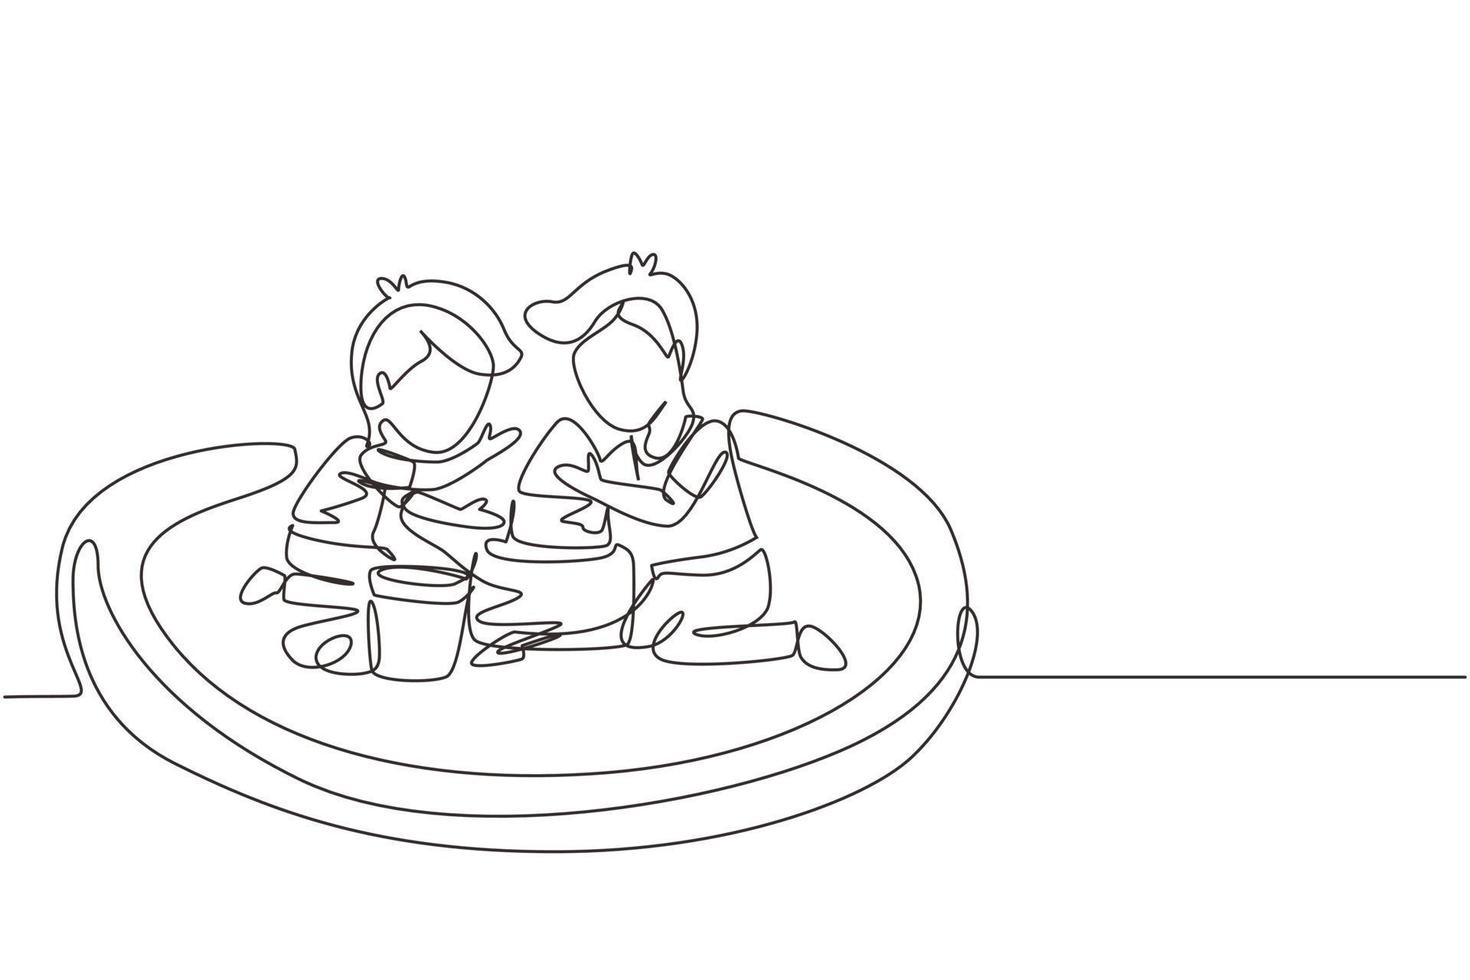 Single continuous line drawing two little boys build sandcastle together. Children sitting on sandbox and playing with sand castle. Brothers or friends having fun. One line draw graphic design vector